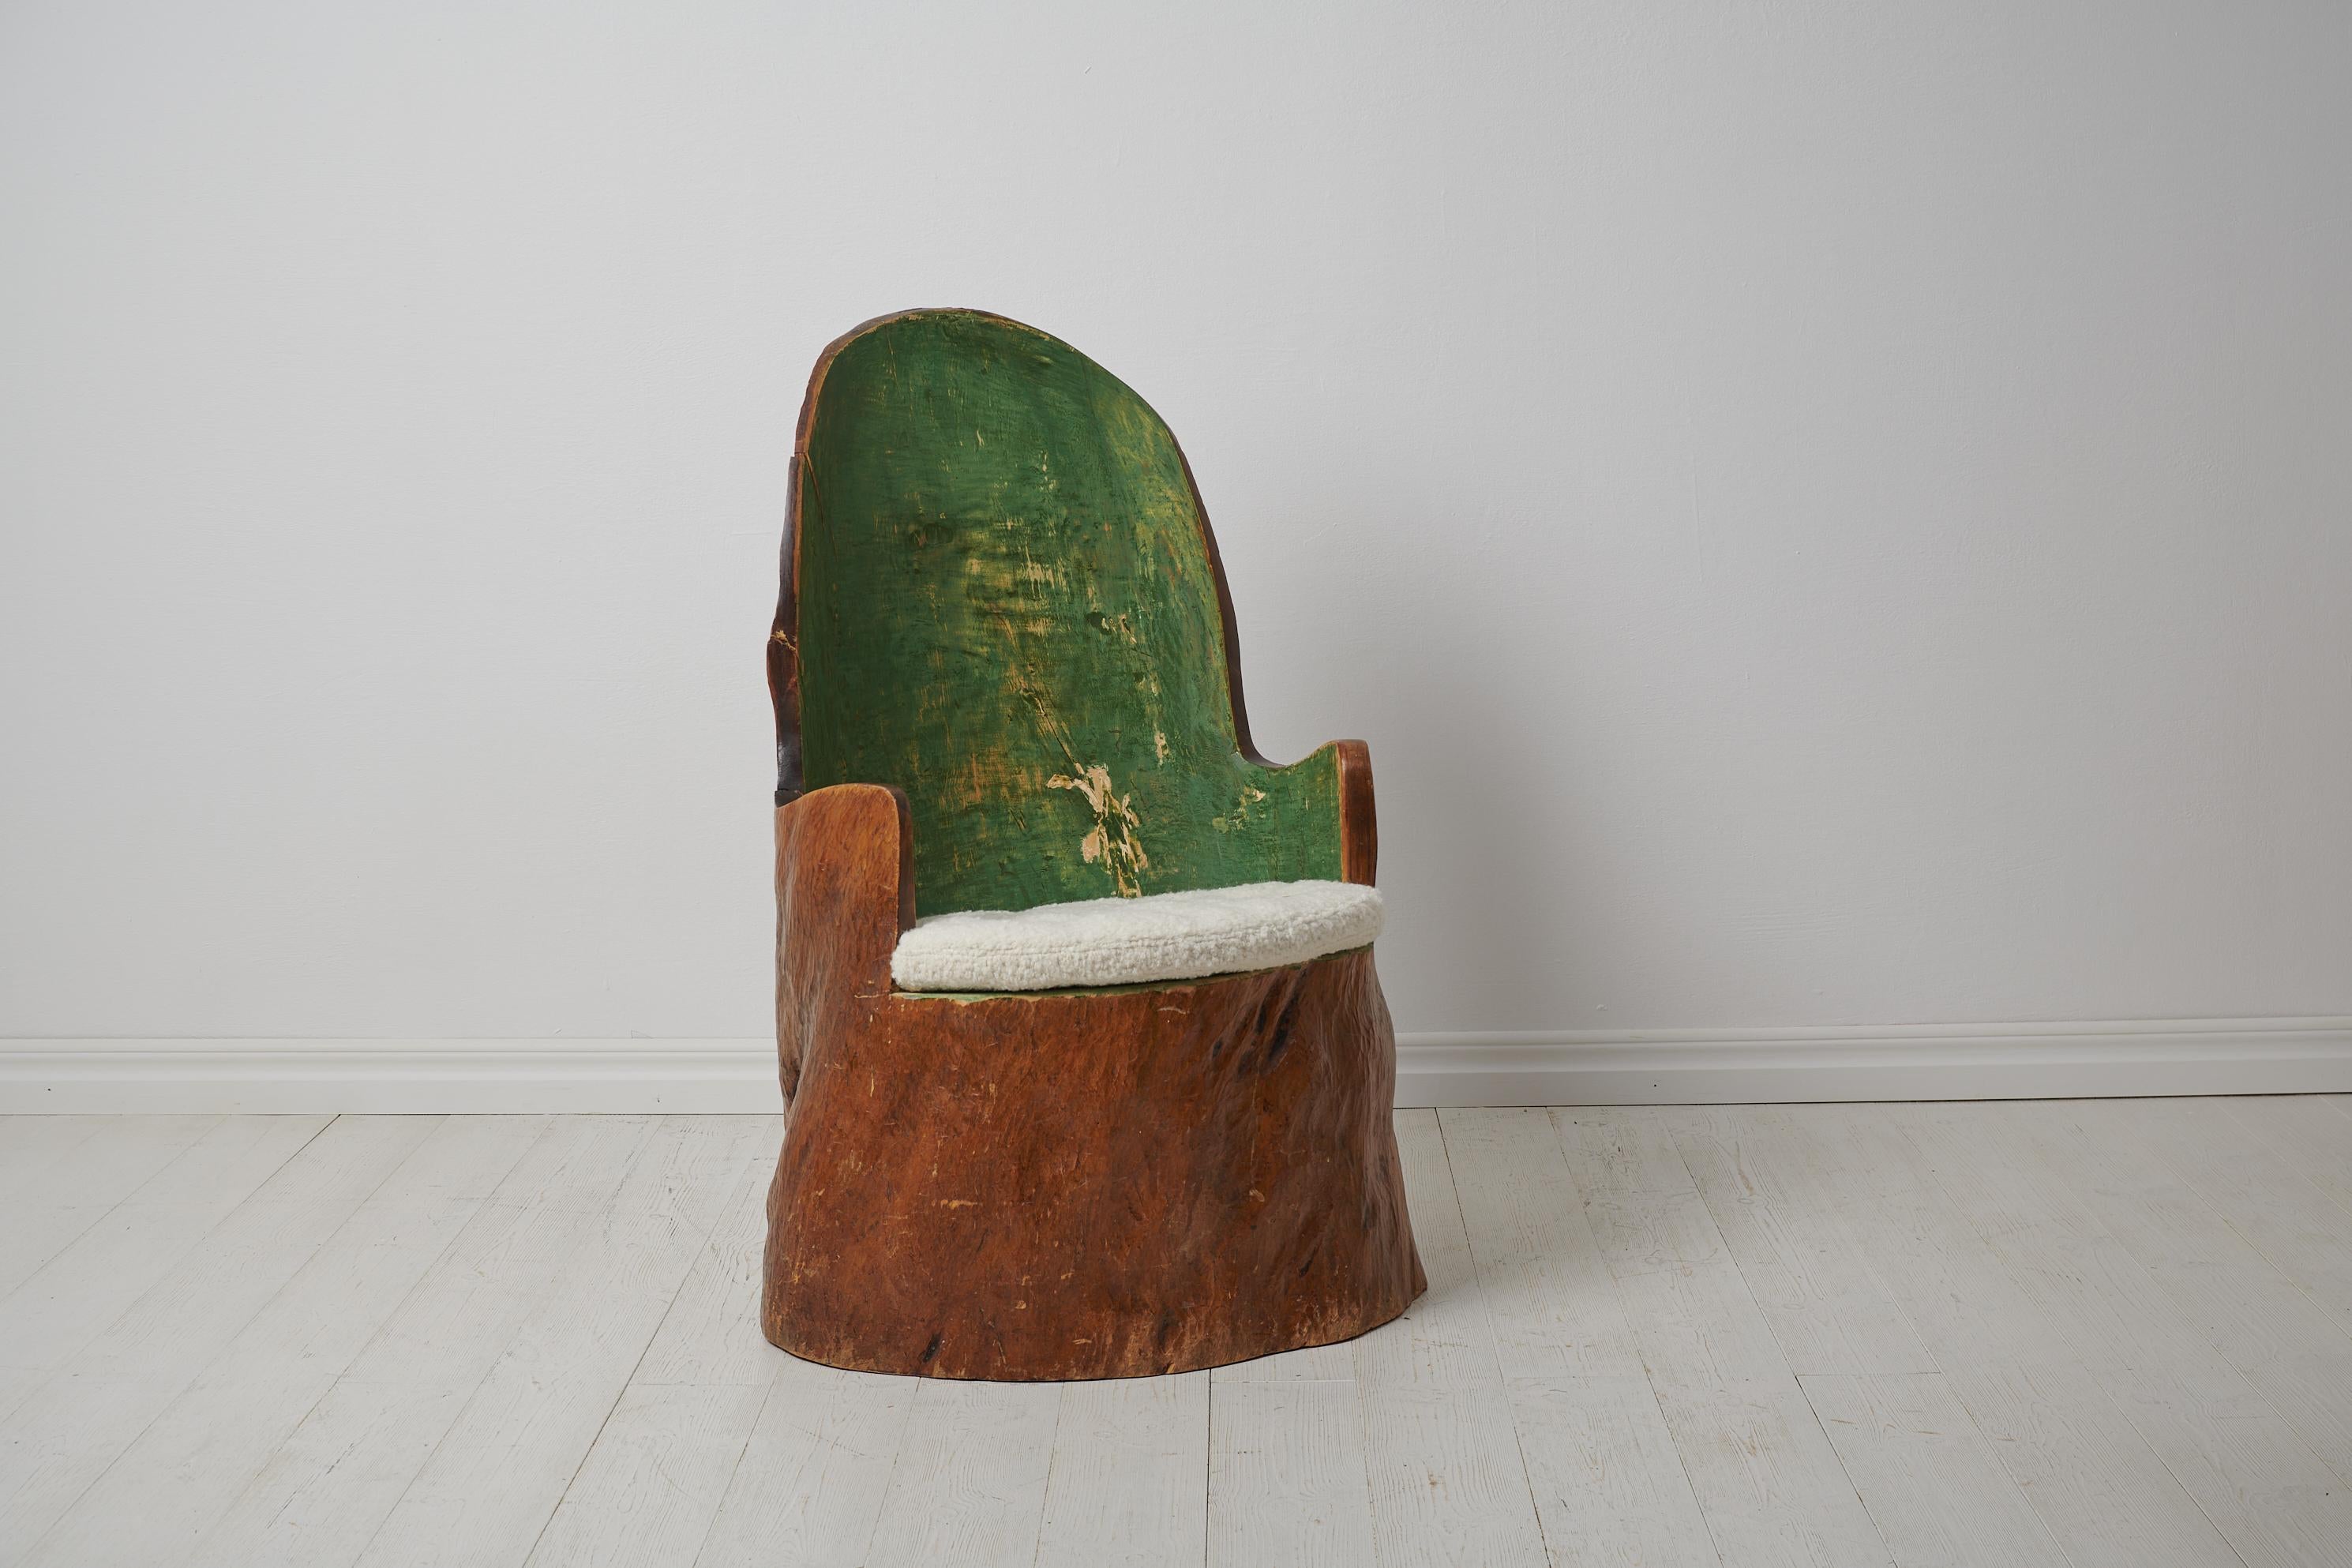 Antique Swedish ”Kubbstol” or ”Stockstol” as they are also known. The chair is a primitive furniture made by hand from one large, solid log of wood. The log has then been hollowed and shaped into the current form. Made from pine around the turn of